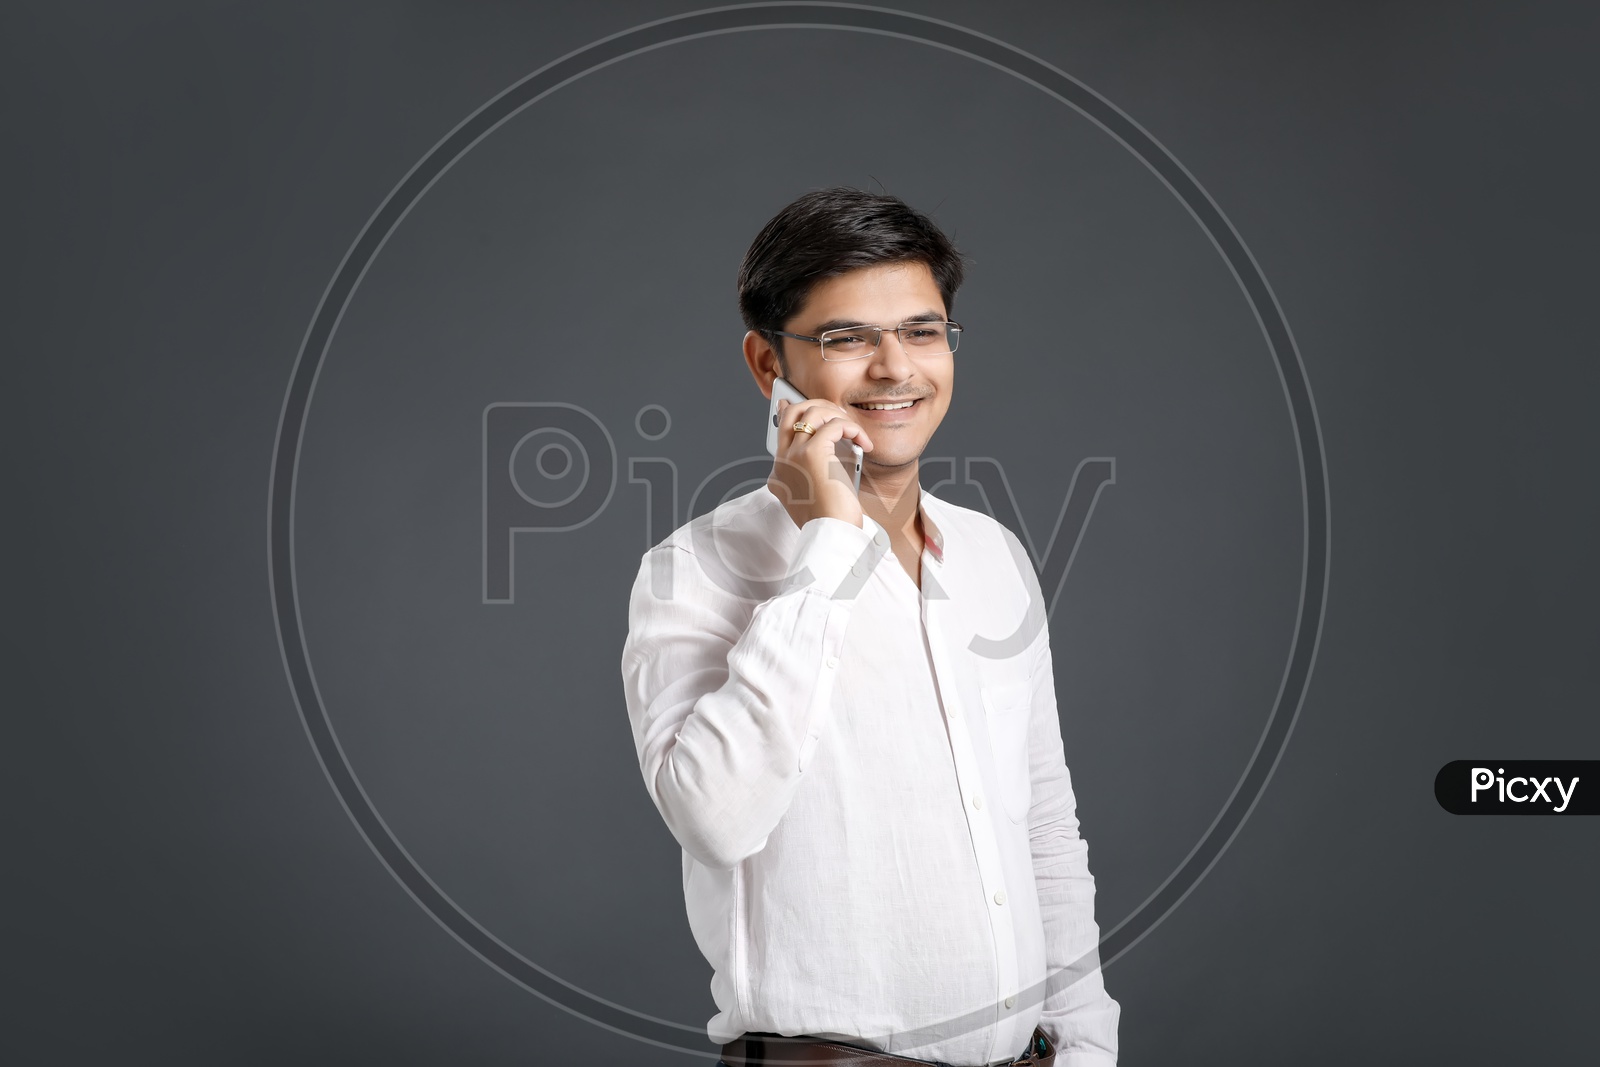 Young Man or Indian  Man Speaking In Smart Phone Or Mobile Over An Isolated Black Background